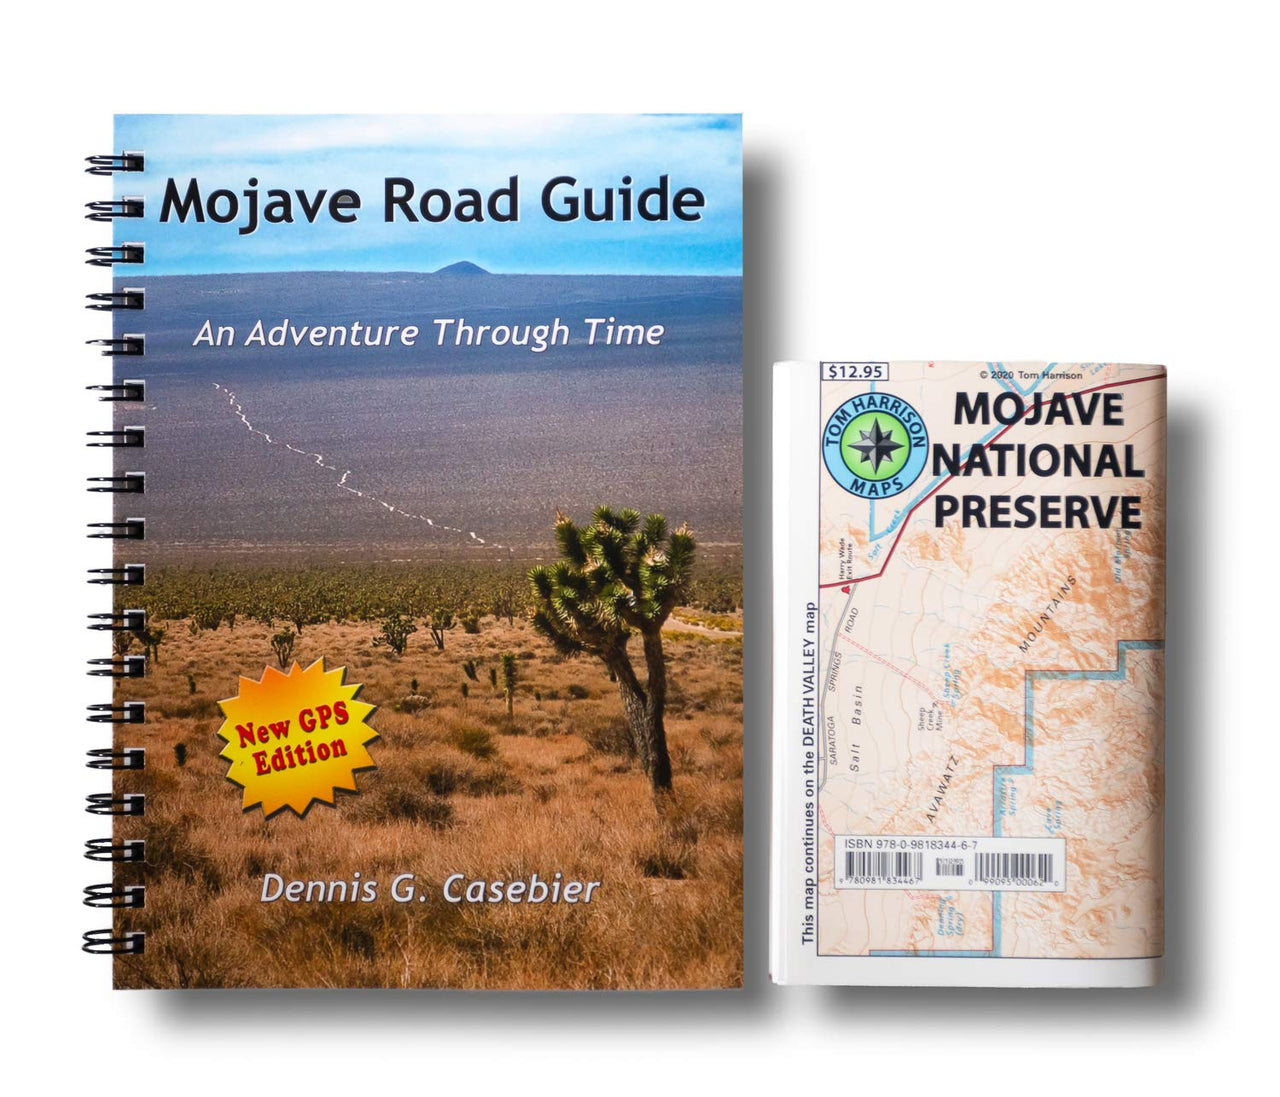 Mojave Road Guide Book and Map of Mojave National Preserve